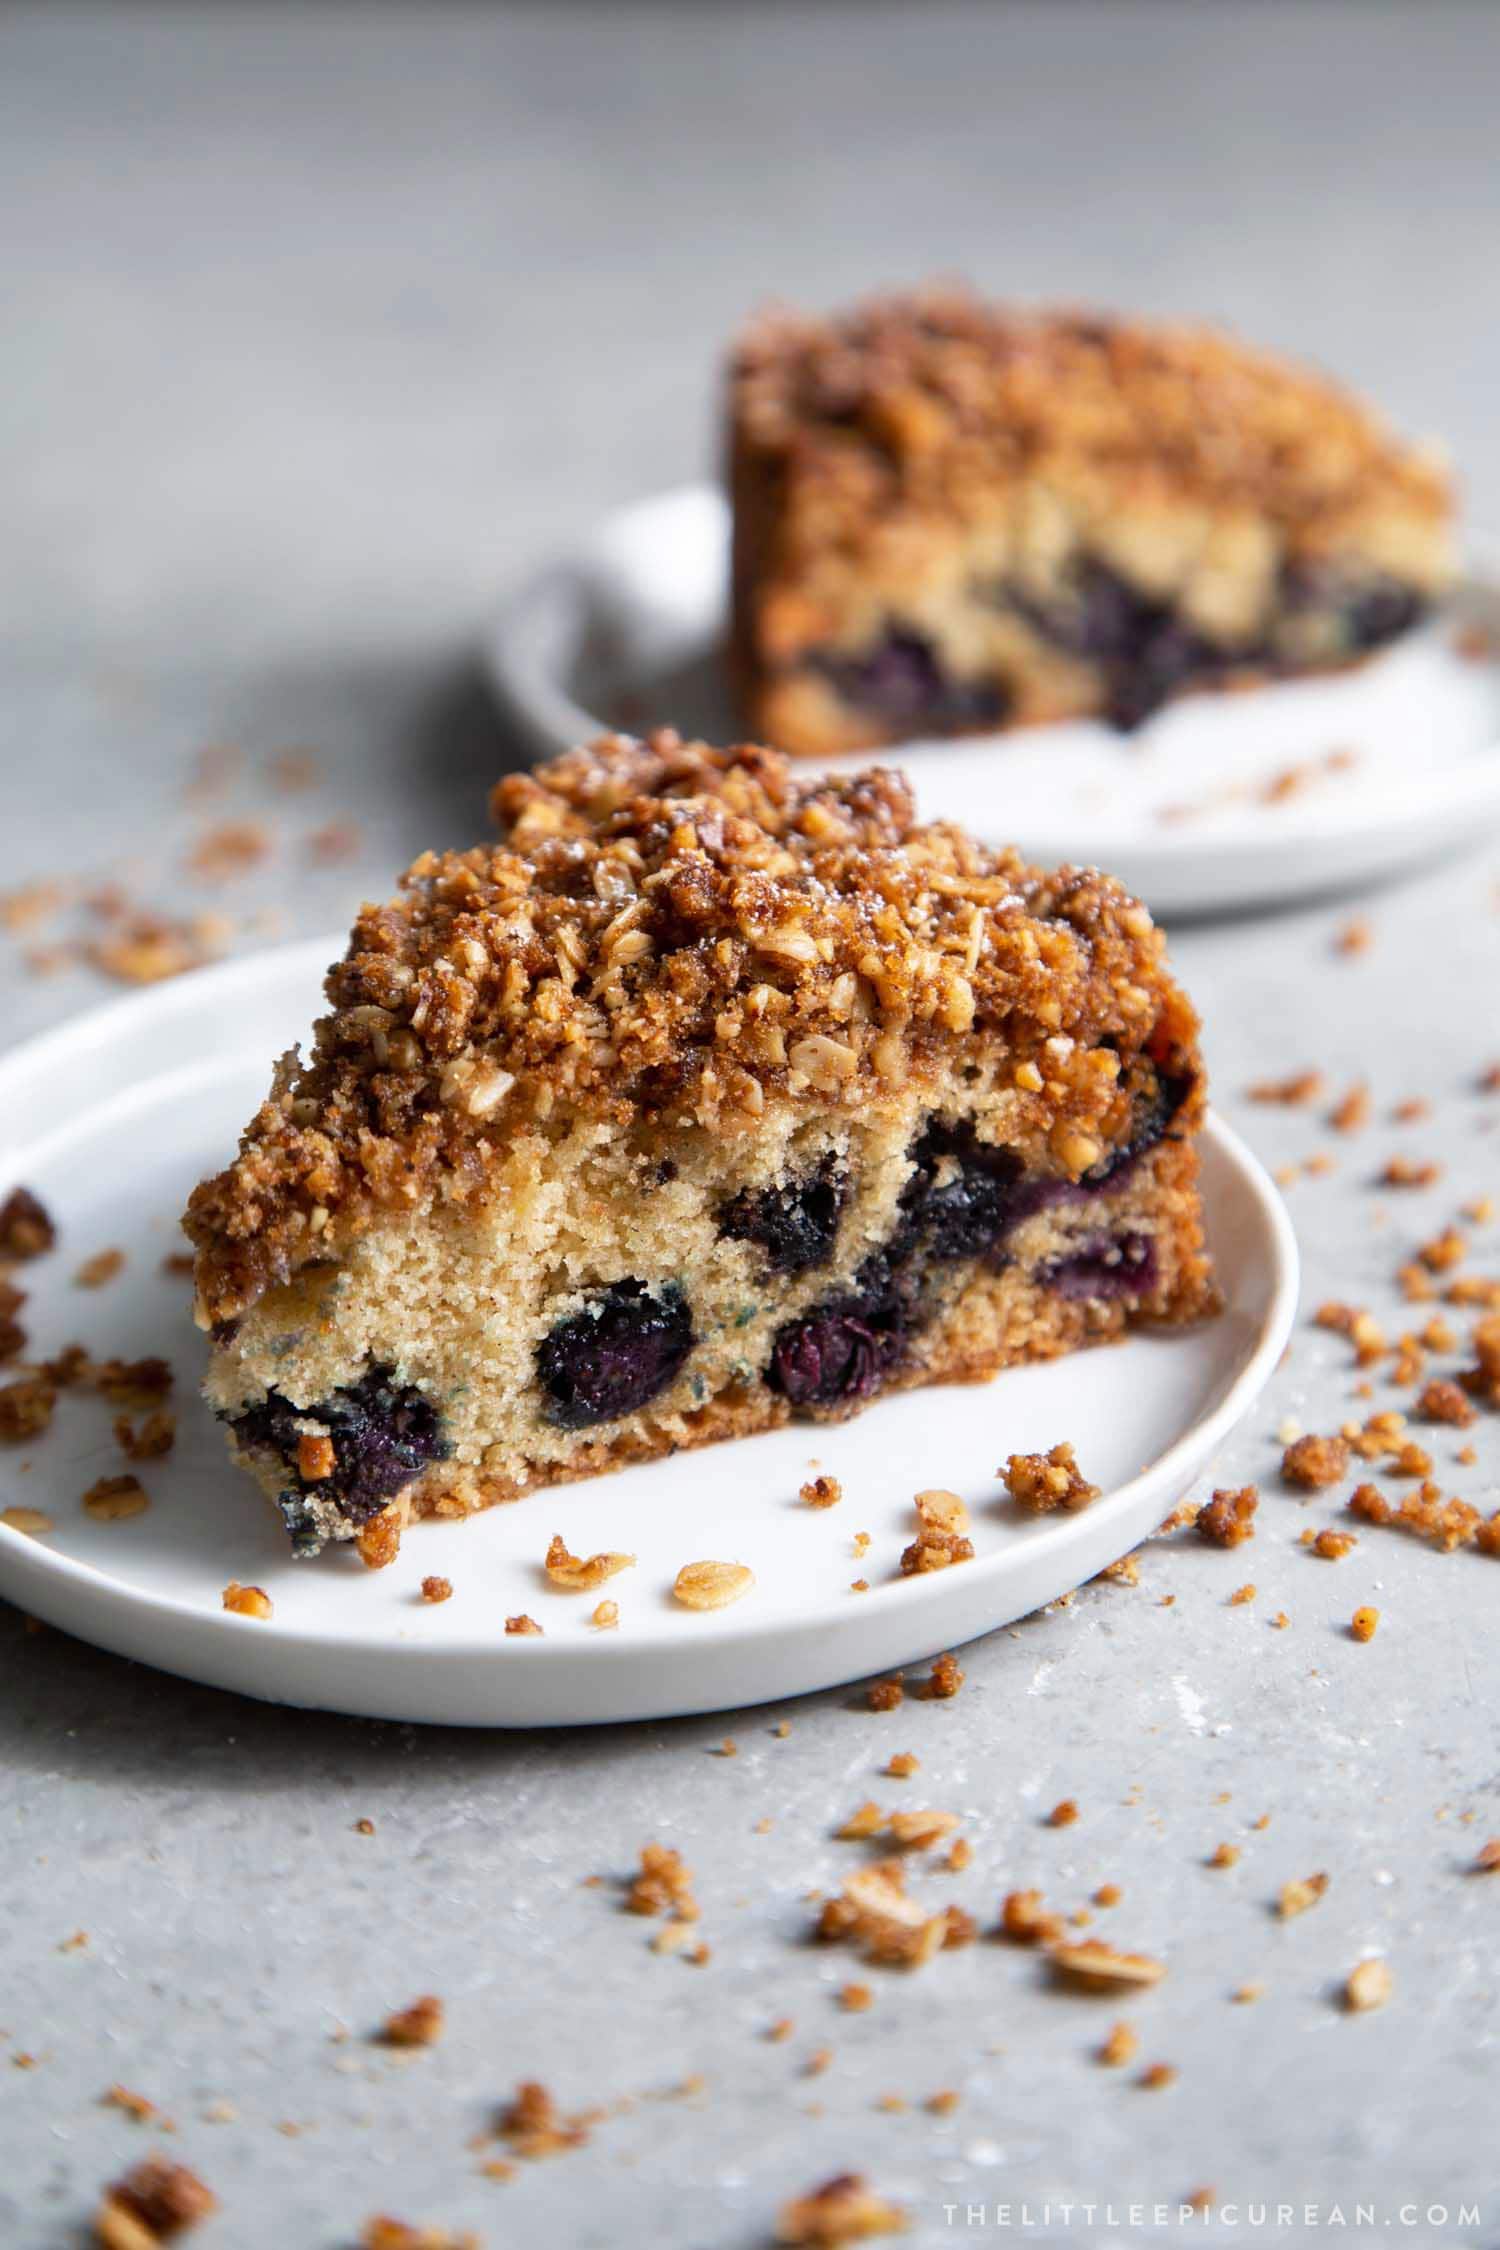 Blueberry Walnut Streusel Cake The Little Epicurean,Bloody Mary Costume